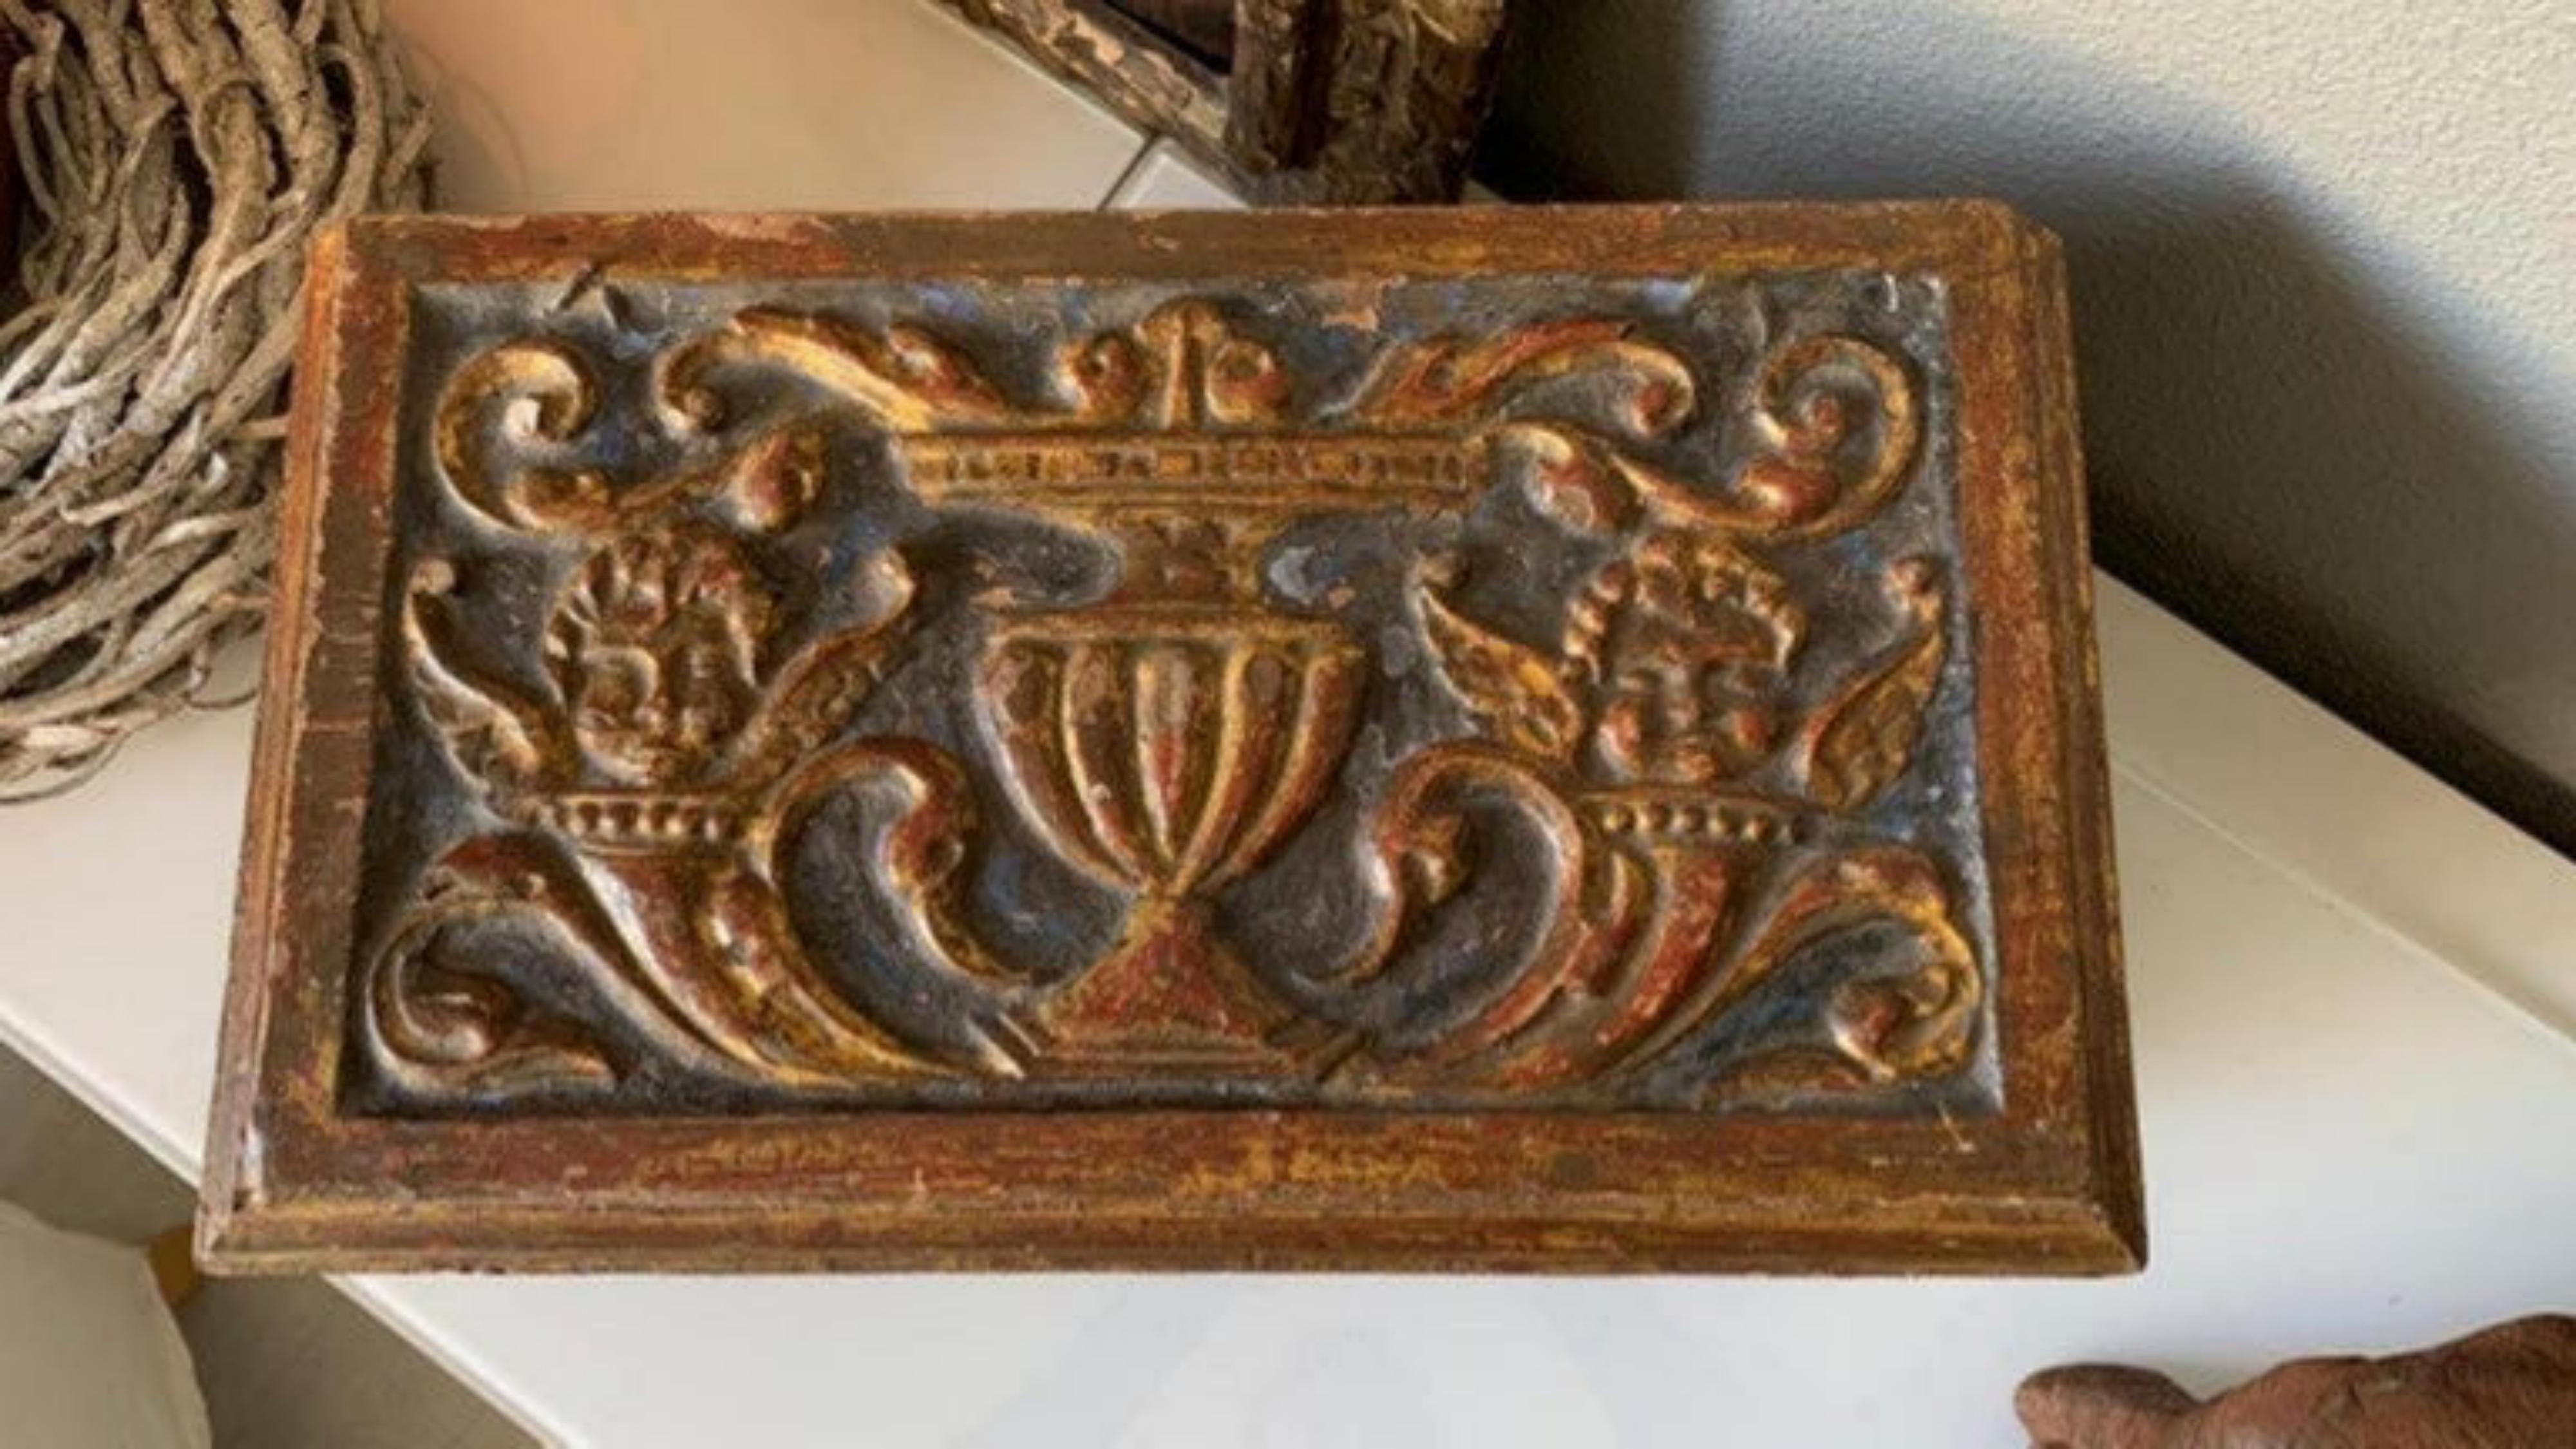 Spanish Renaissance casket,
16th century
In carved, polychrome and gilded wood decorated with a vase with horns of plenty, heads of cherubs and fruits.
In the lock a shield with two feathers.
Measures: 21.5 x 44.5 x 24.5 cm.
Good condition for the